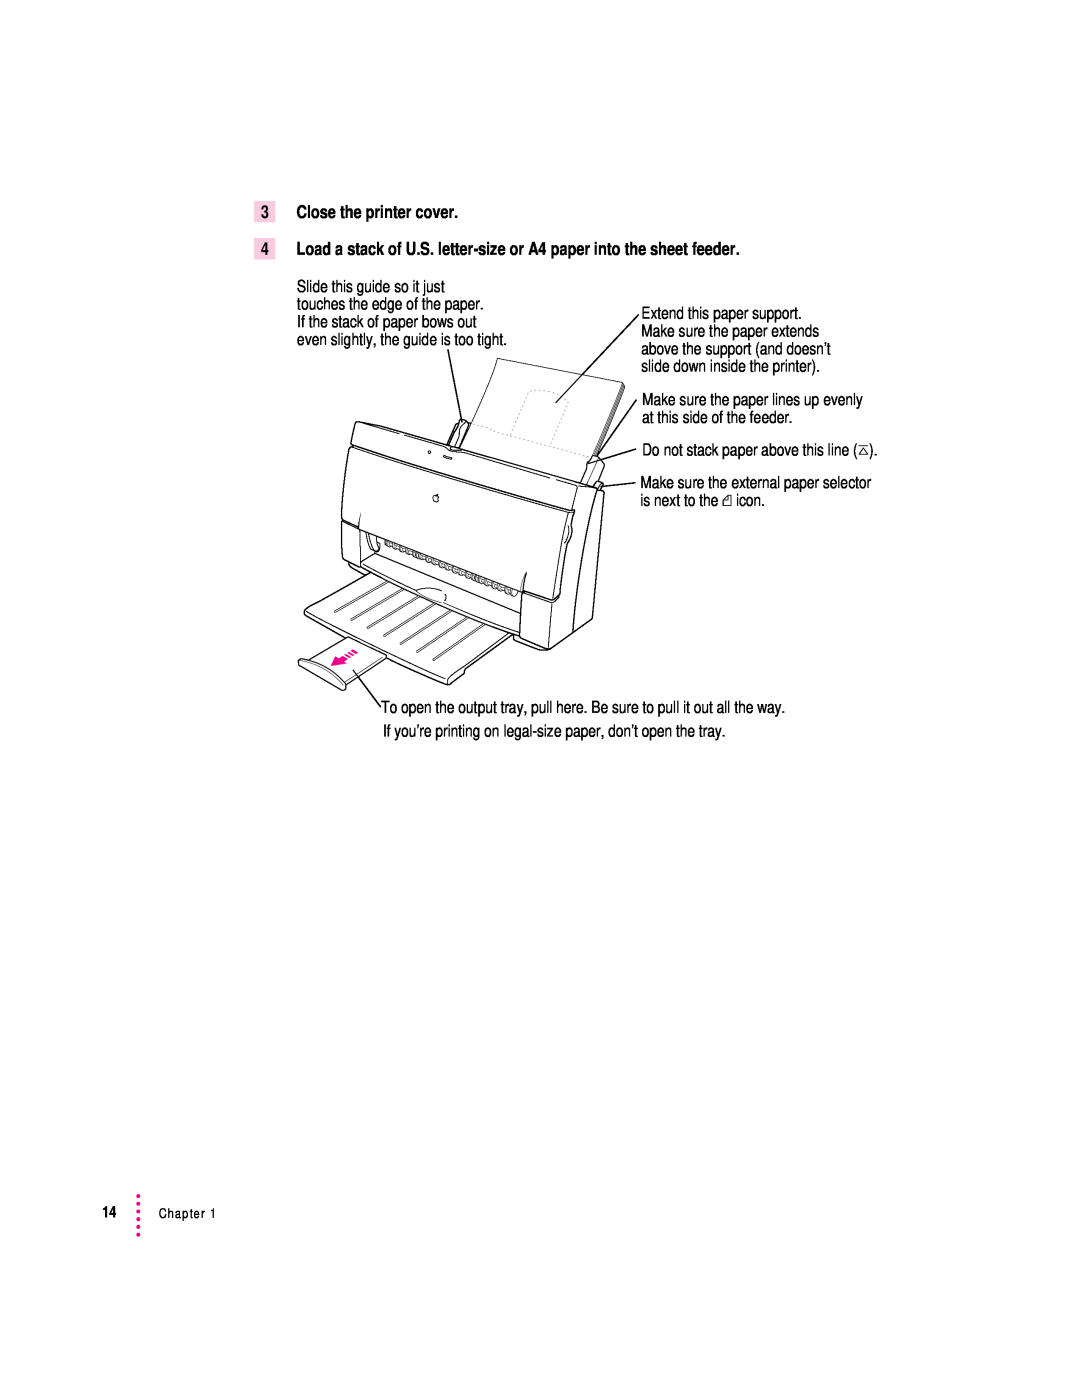 Apple 2400 manual Close the printer cover, Load a stack of U.S. letter-size or A4 paper into the sheet feeder 